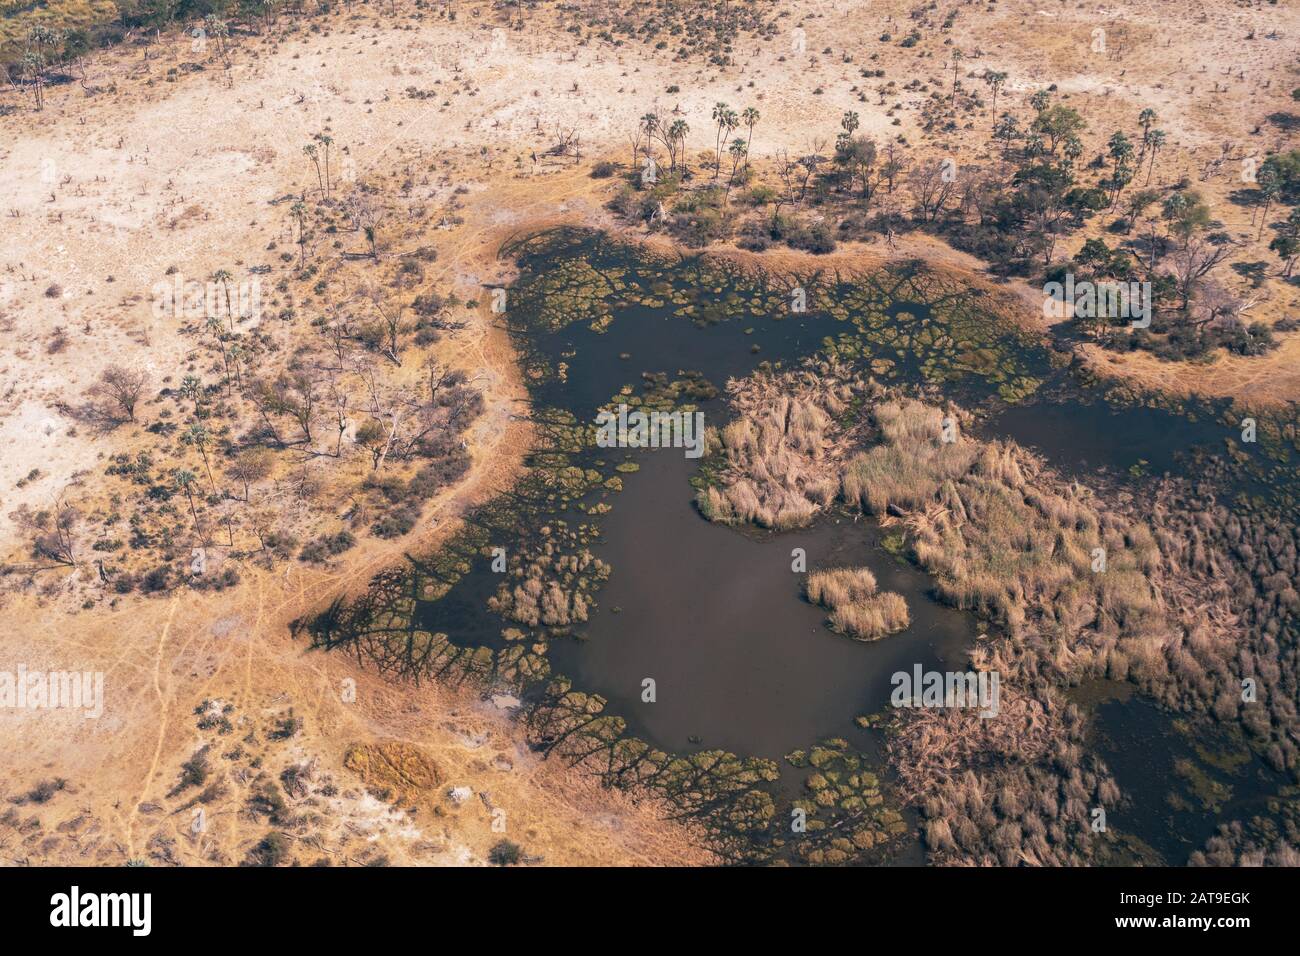 Okavango Delta Aerial of a Pond or Small Lake with Reeds in Dry Savanna Plain with Trees in Moremi Game Reserve Stock Photo